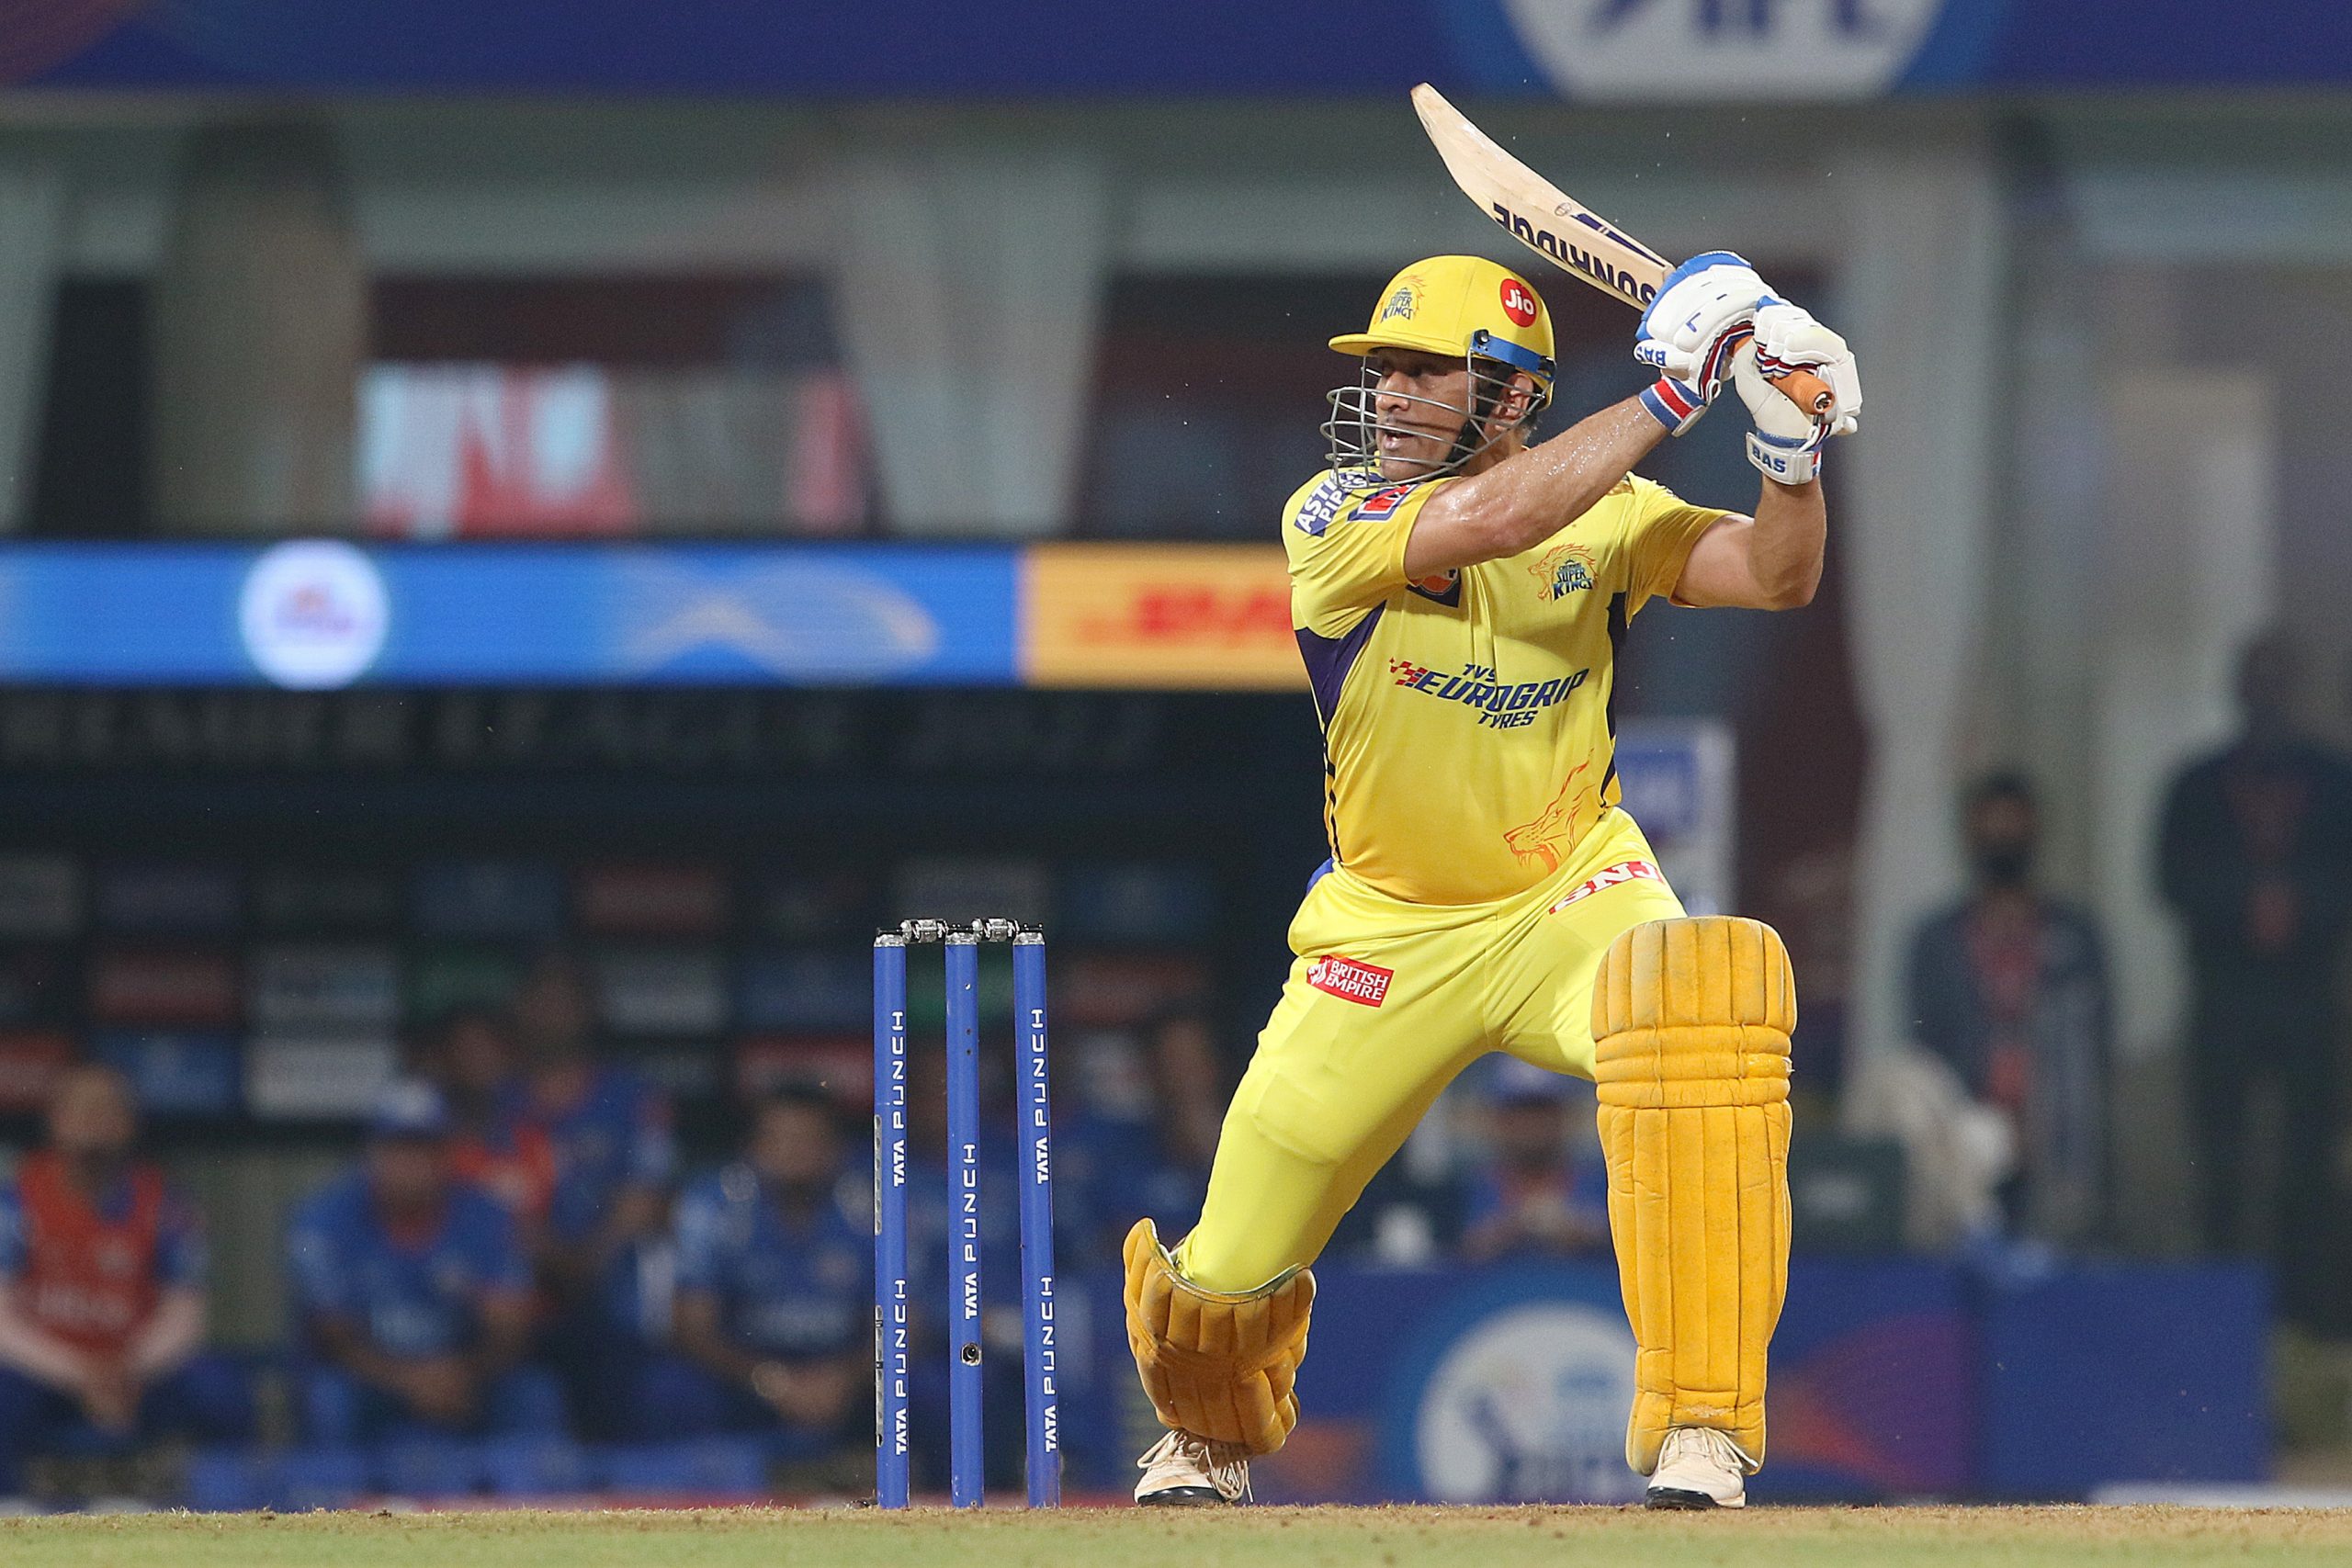 CSK cling to Dhoni, seeks revival against PBKS